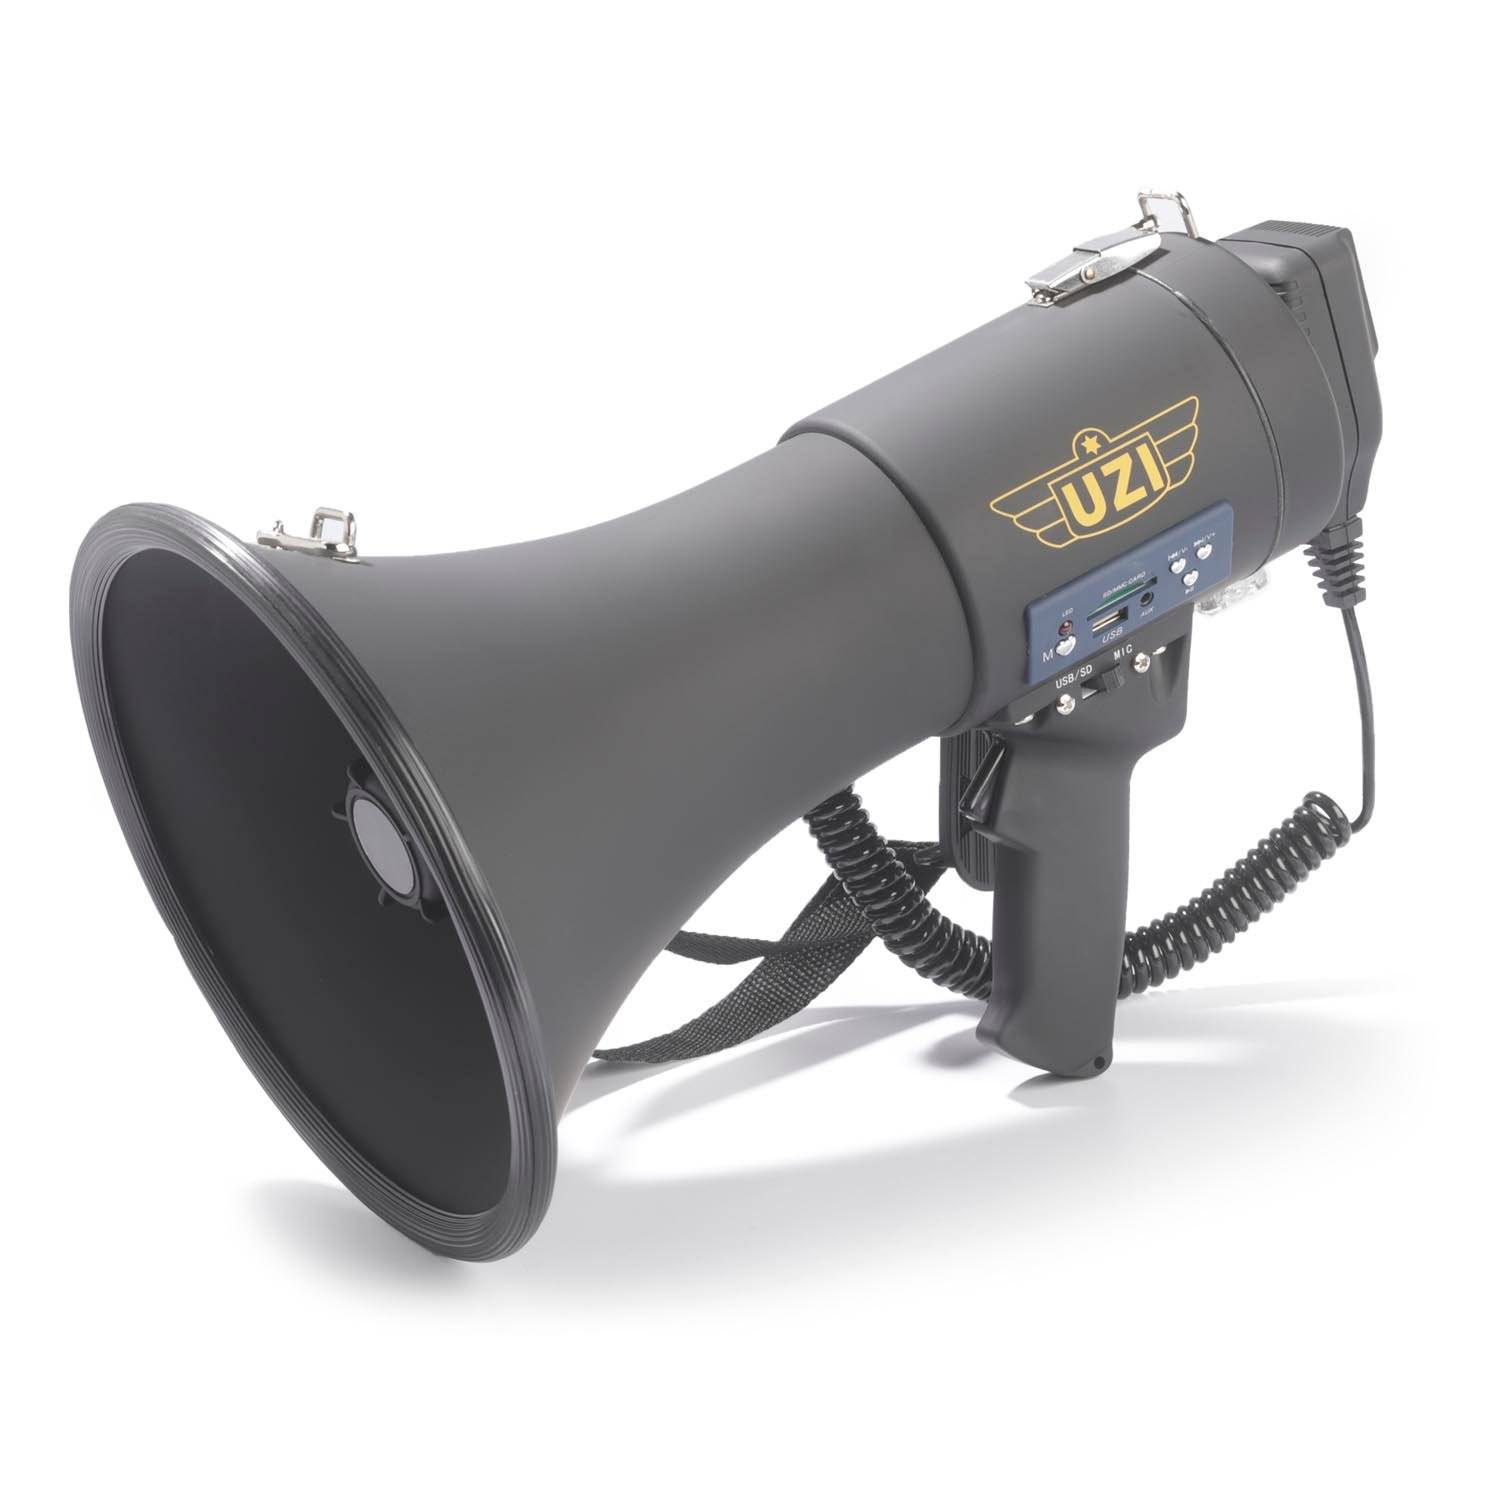 50 Watt Super Loud Megaphone with Microphone and Safety Siren 